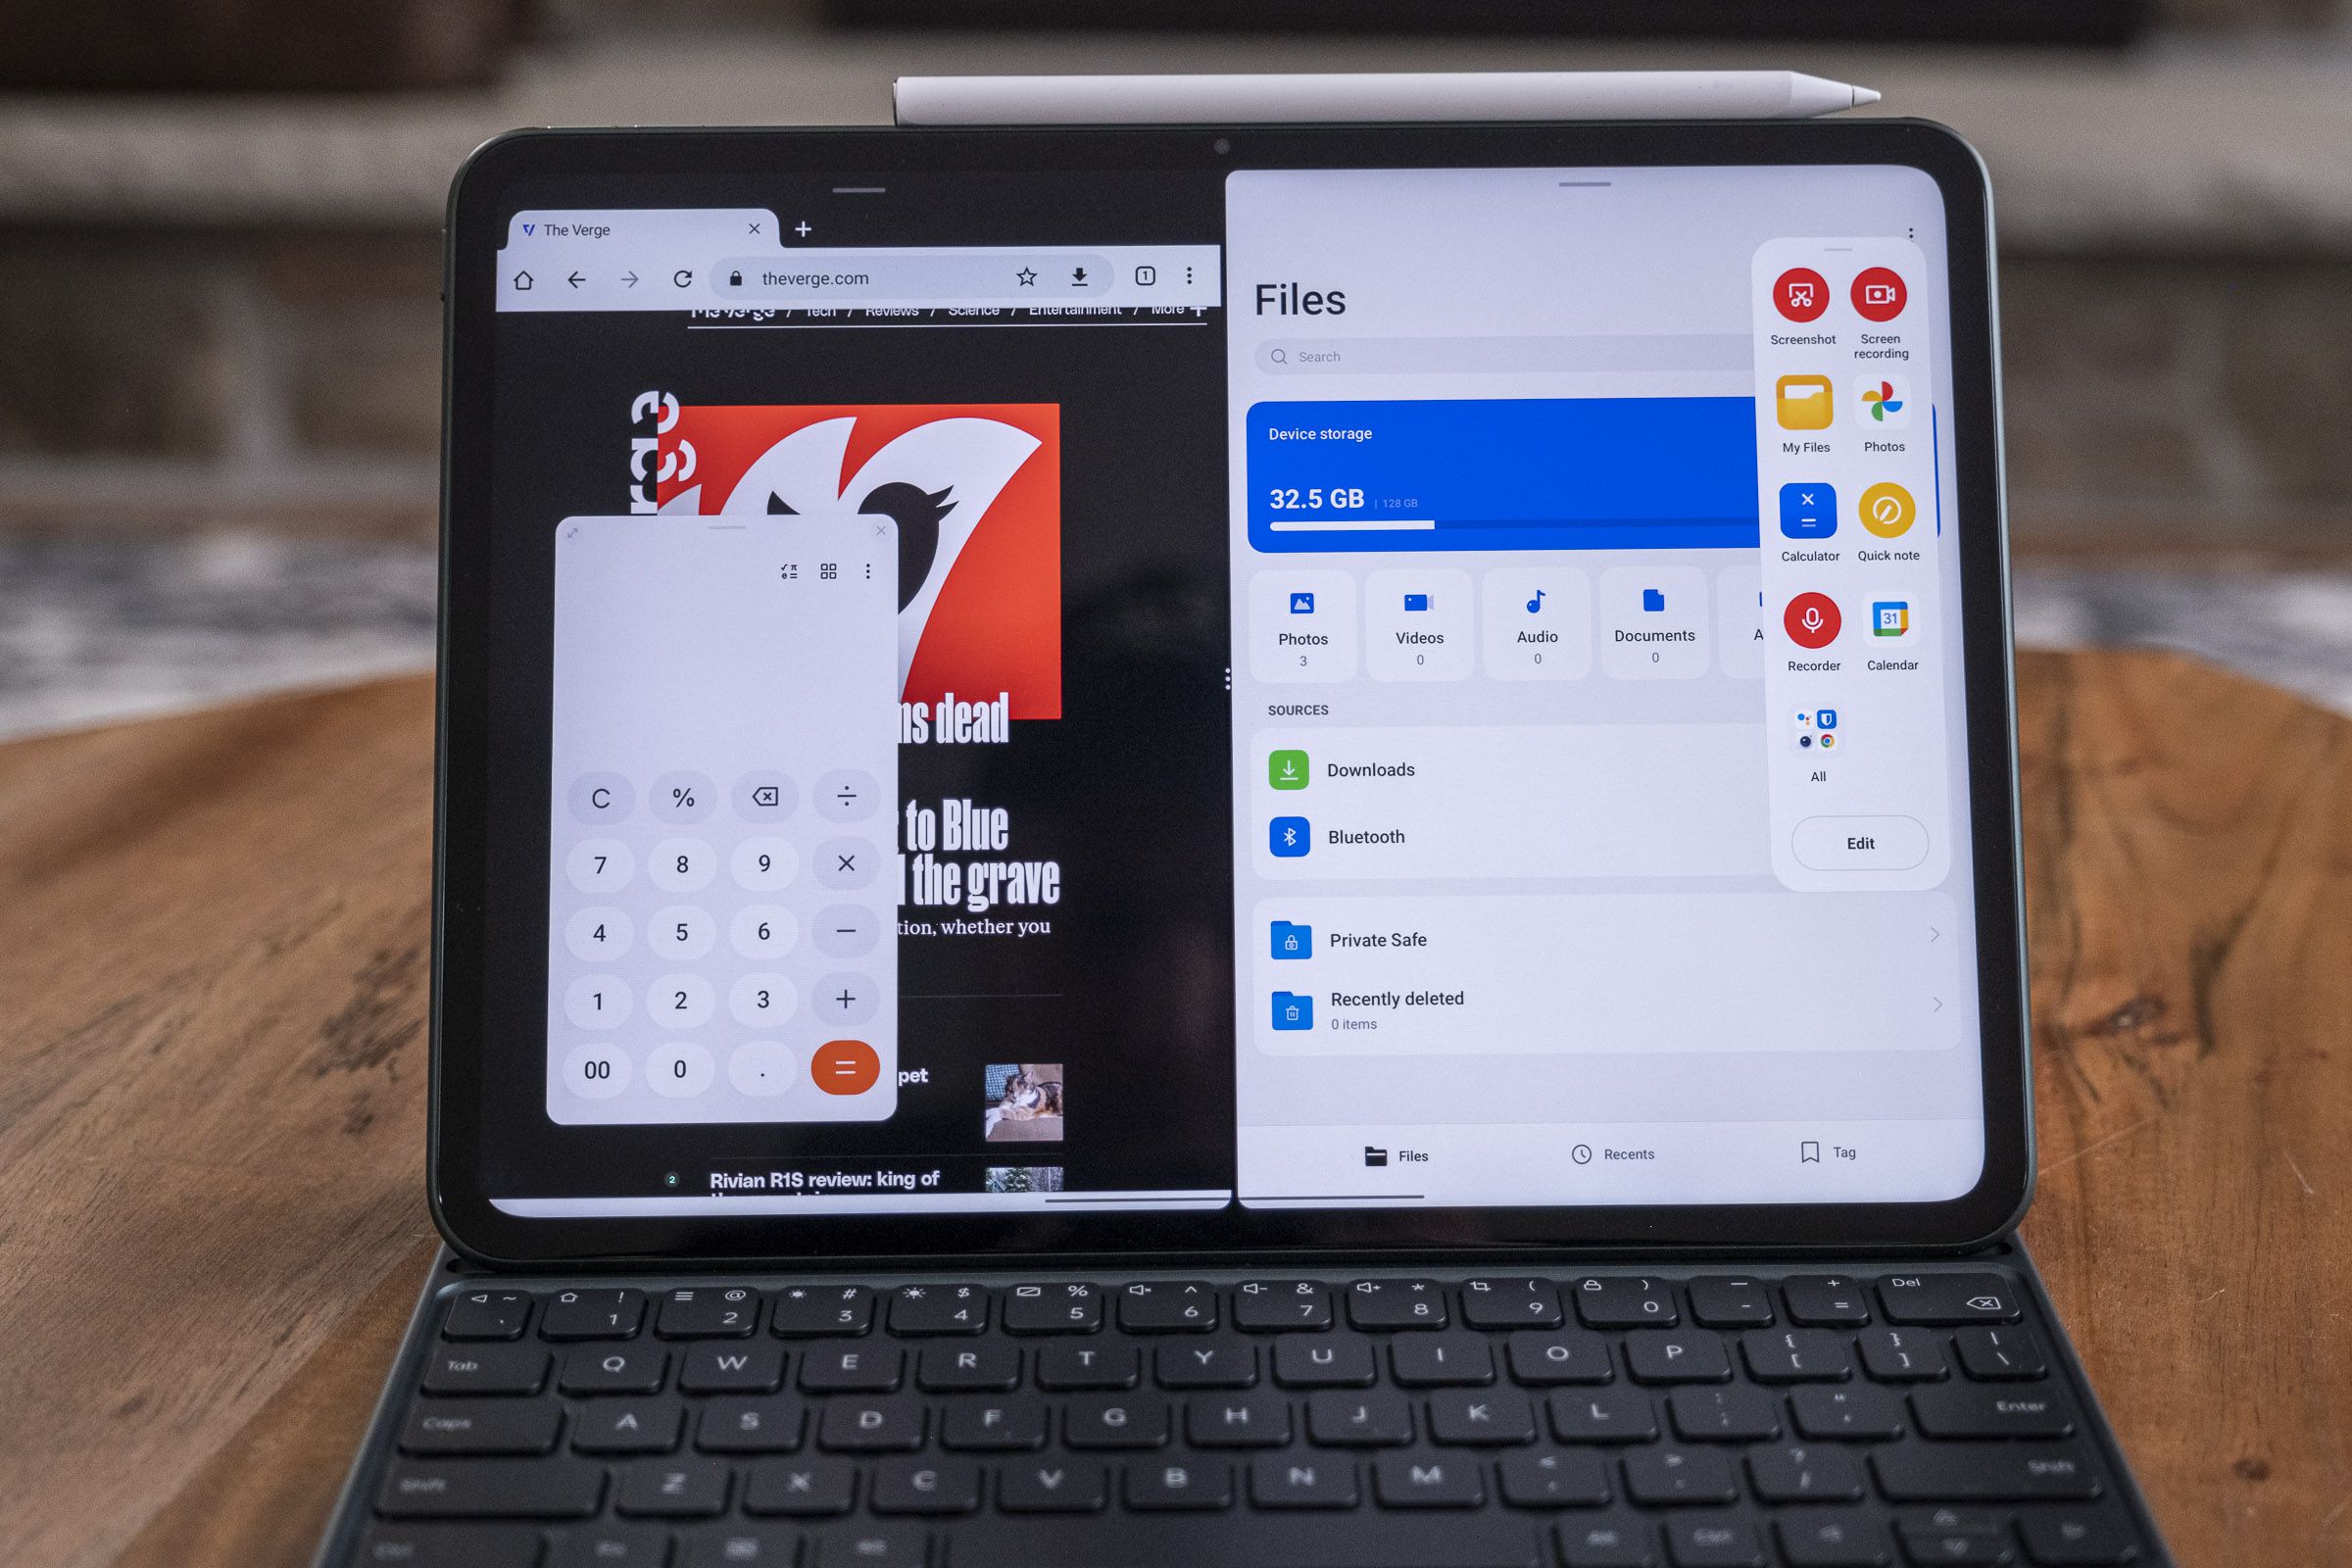 The OnePlus Pad running three apps at the same time